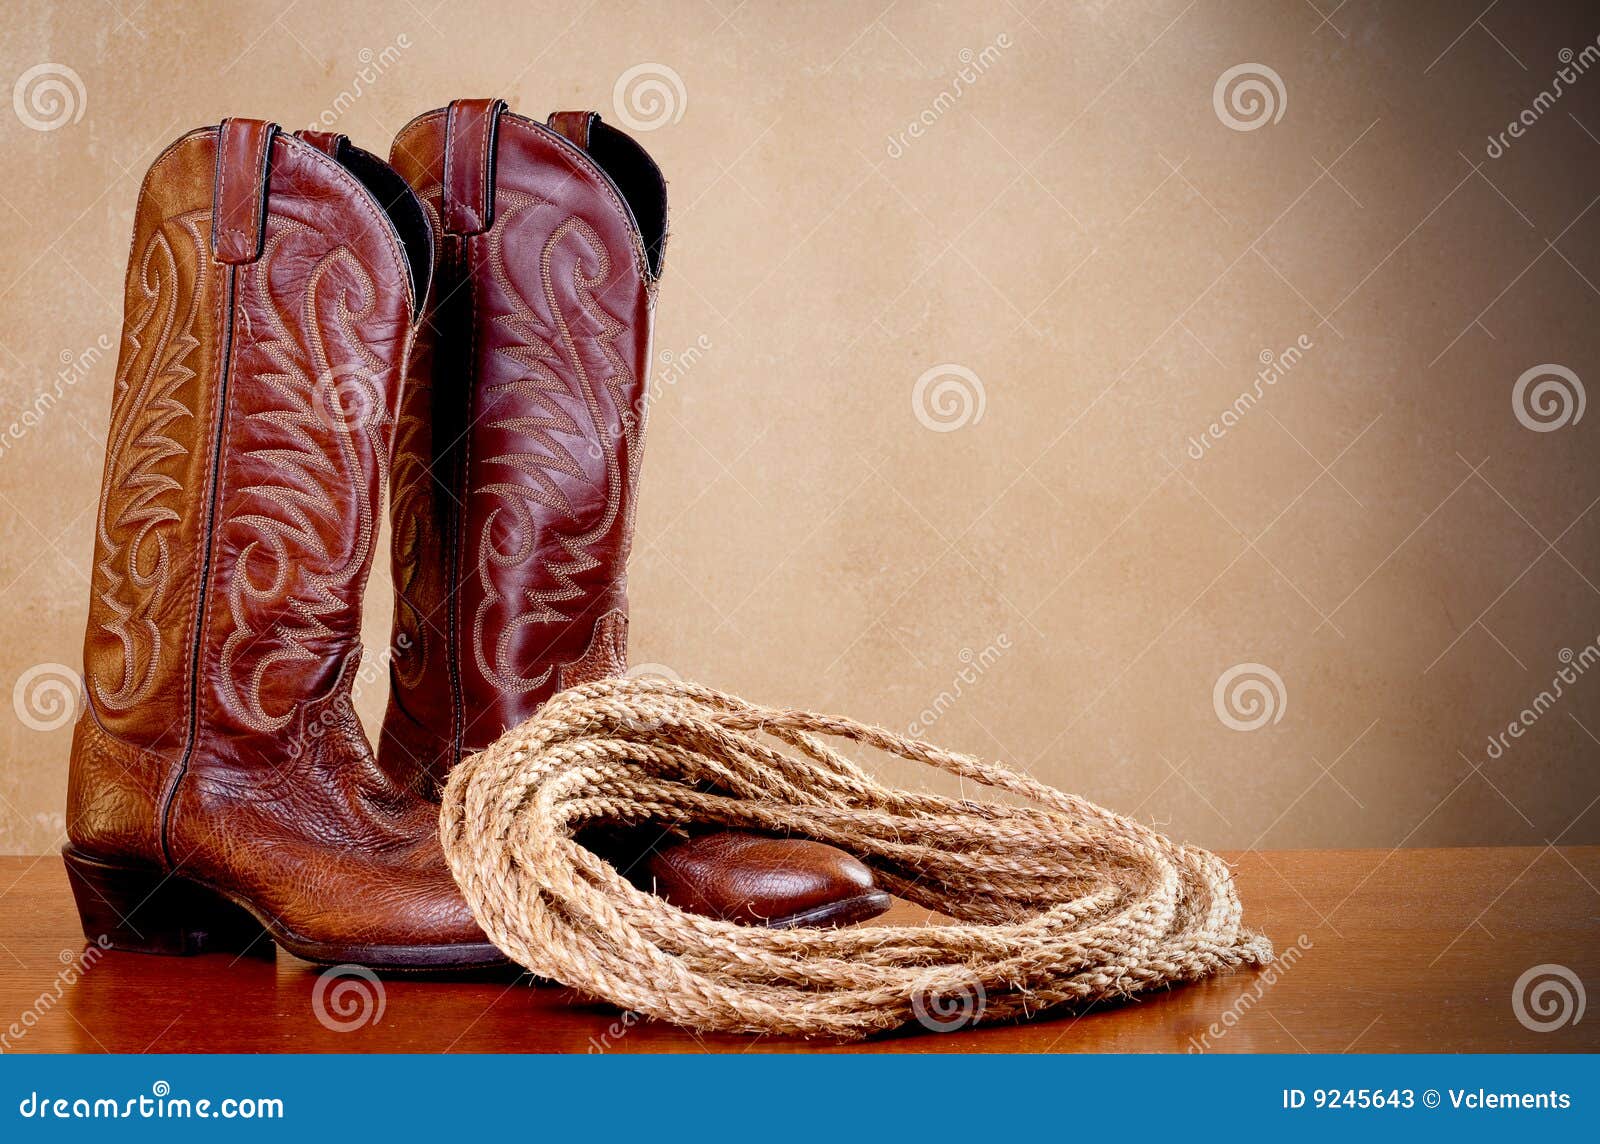 brown cowboy boots and a coil of rope on brown